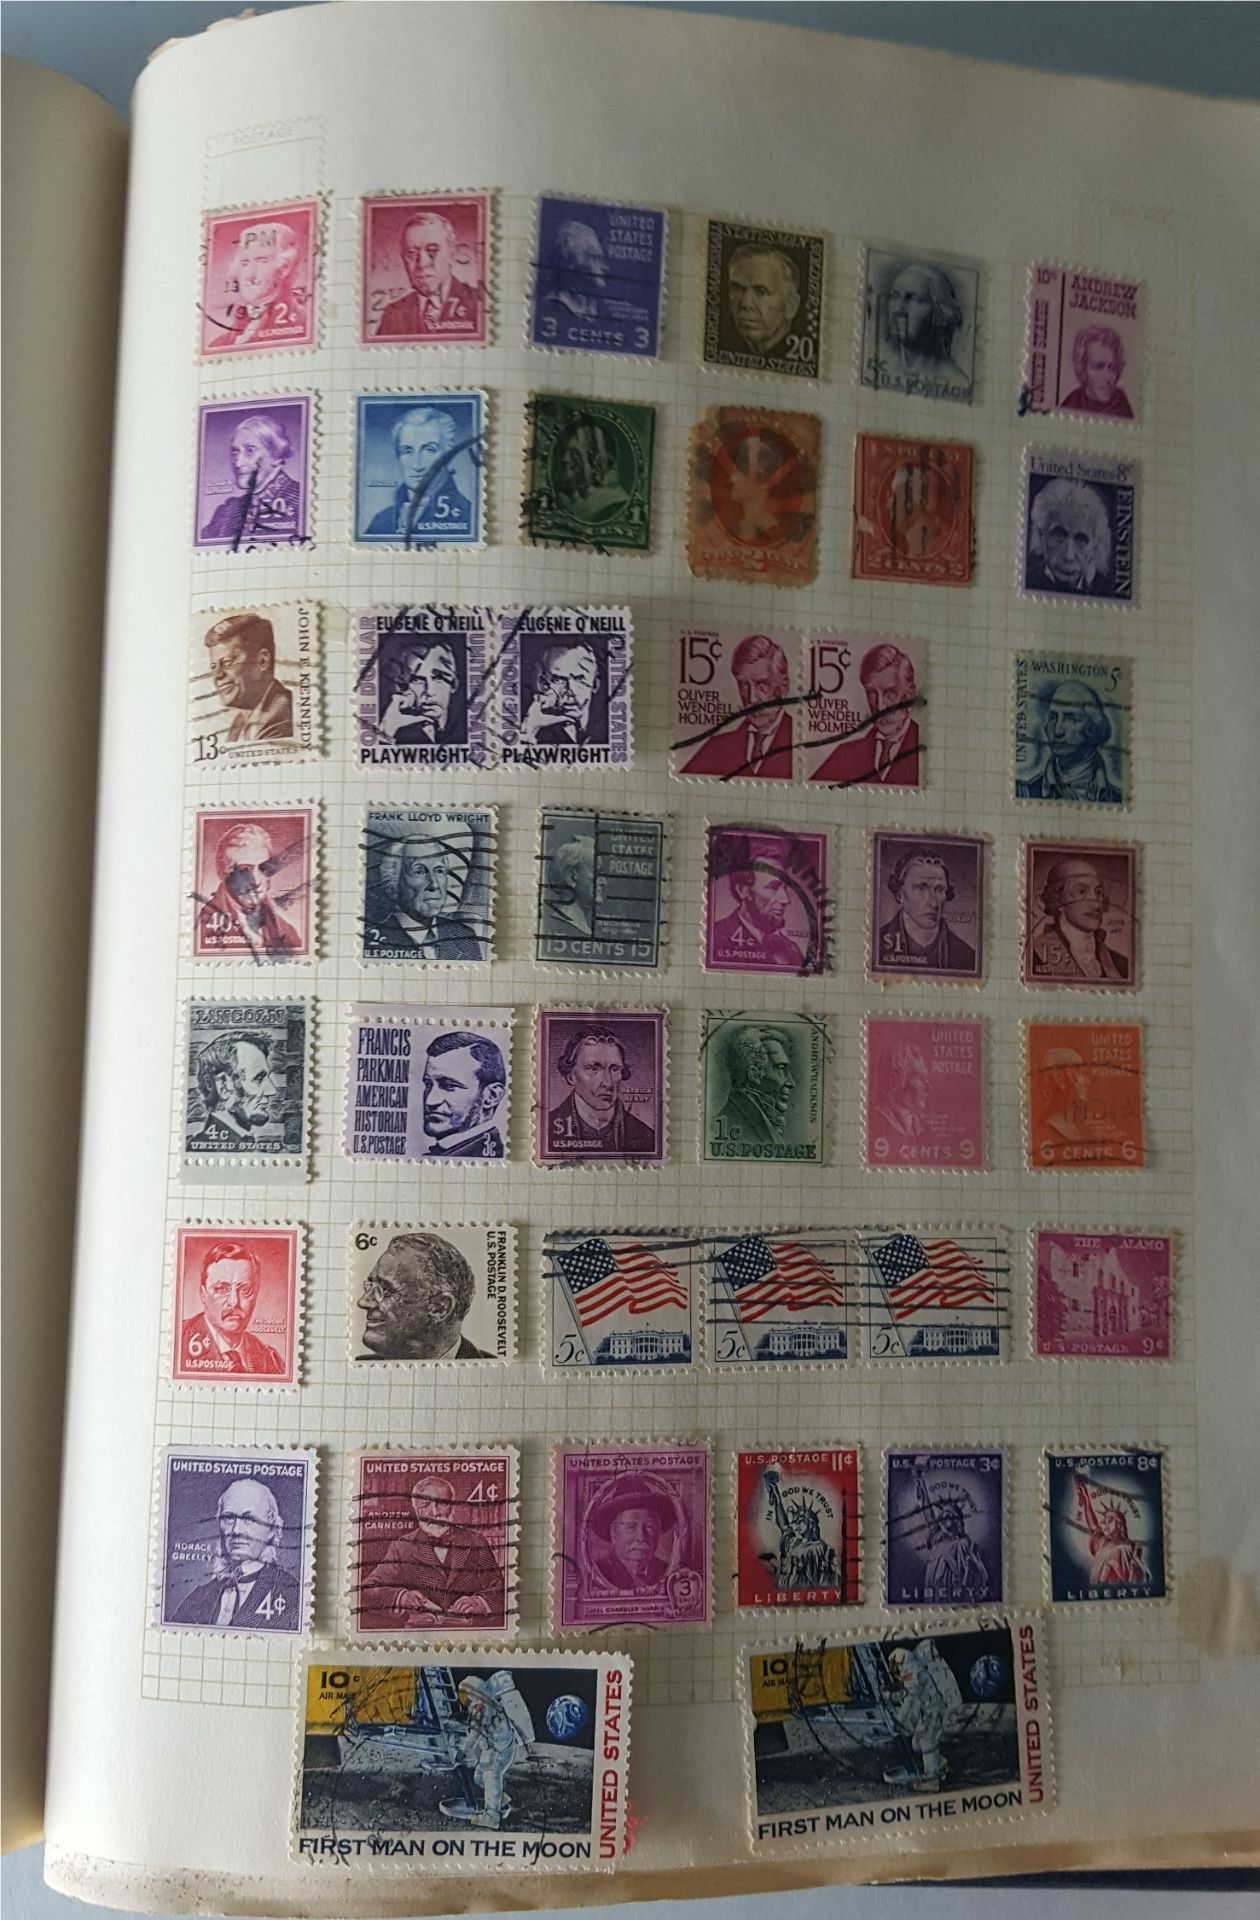 Vintage Retro Concord Stamp Album British, Commonwealth & World Stamps Over 500 Stamps - Image 10 of 11